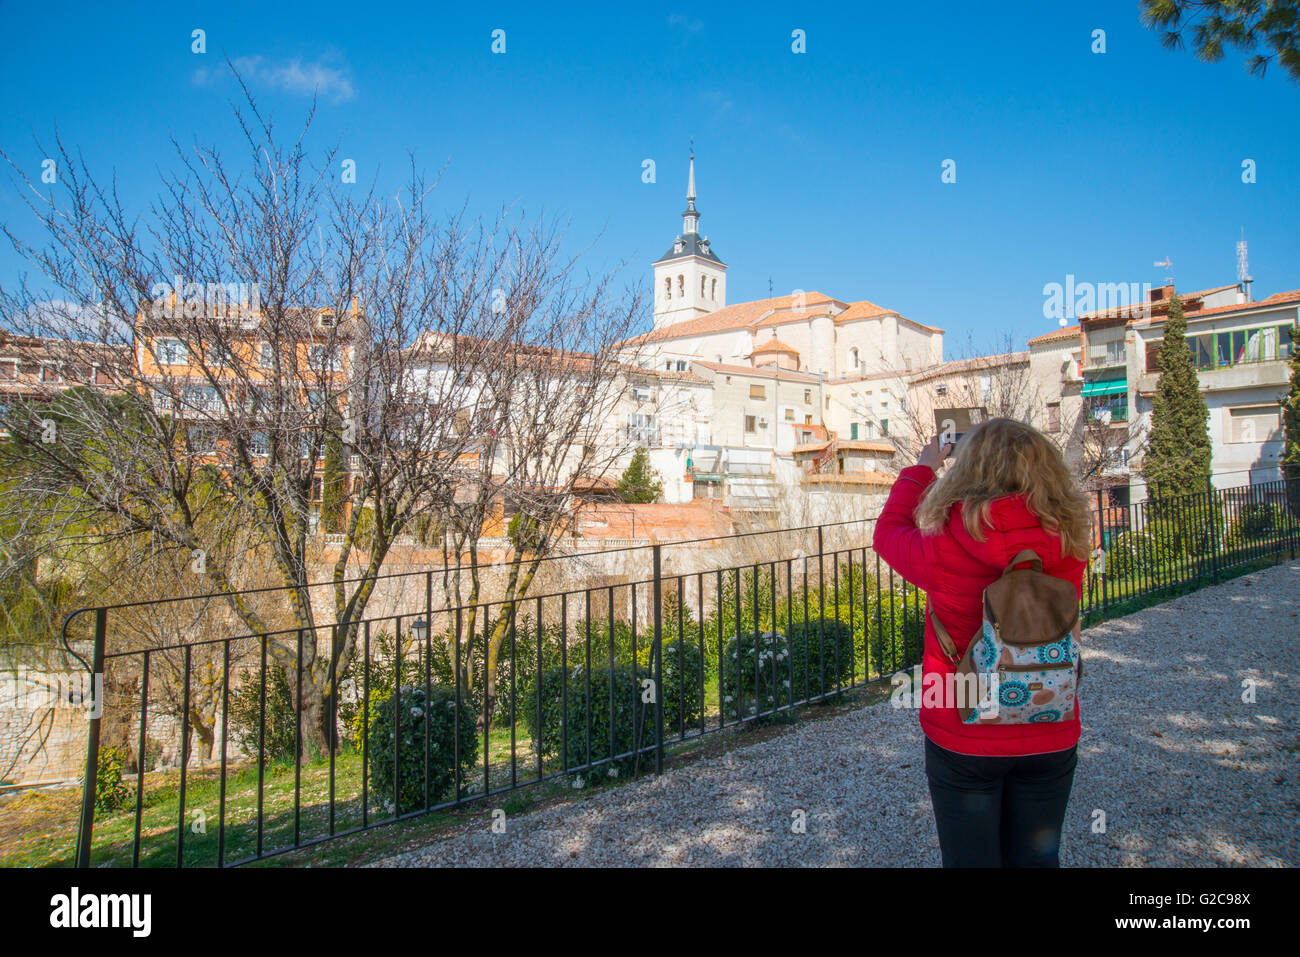 Woman taking photos with her mobile phone. Colmenar de Oreja, Madrid province, Spain. Stock Photo